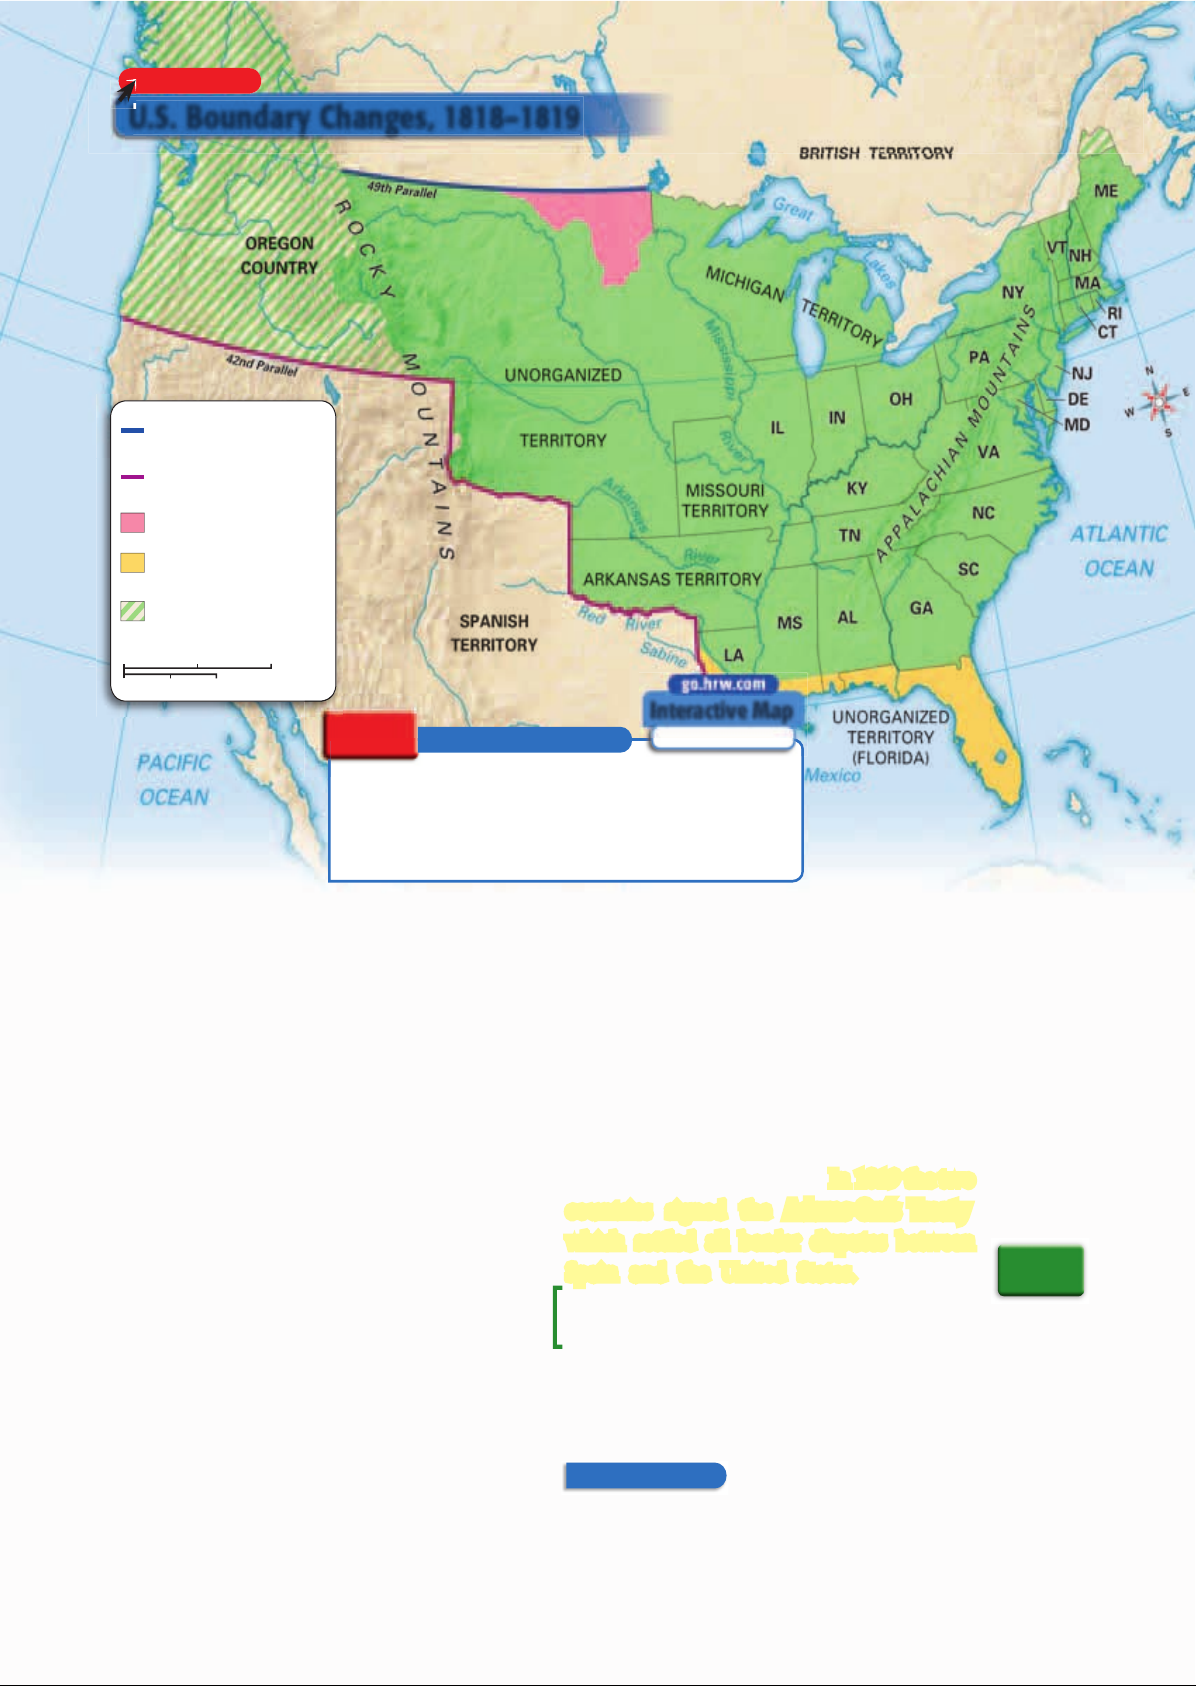 US_History_Textbook_8th_Grade_Chapter_8_A_New_National_Identity Image-3